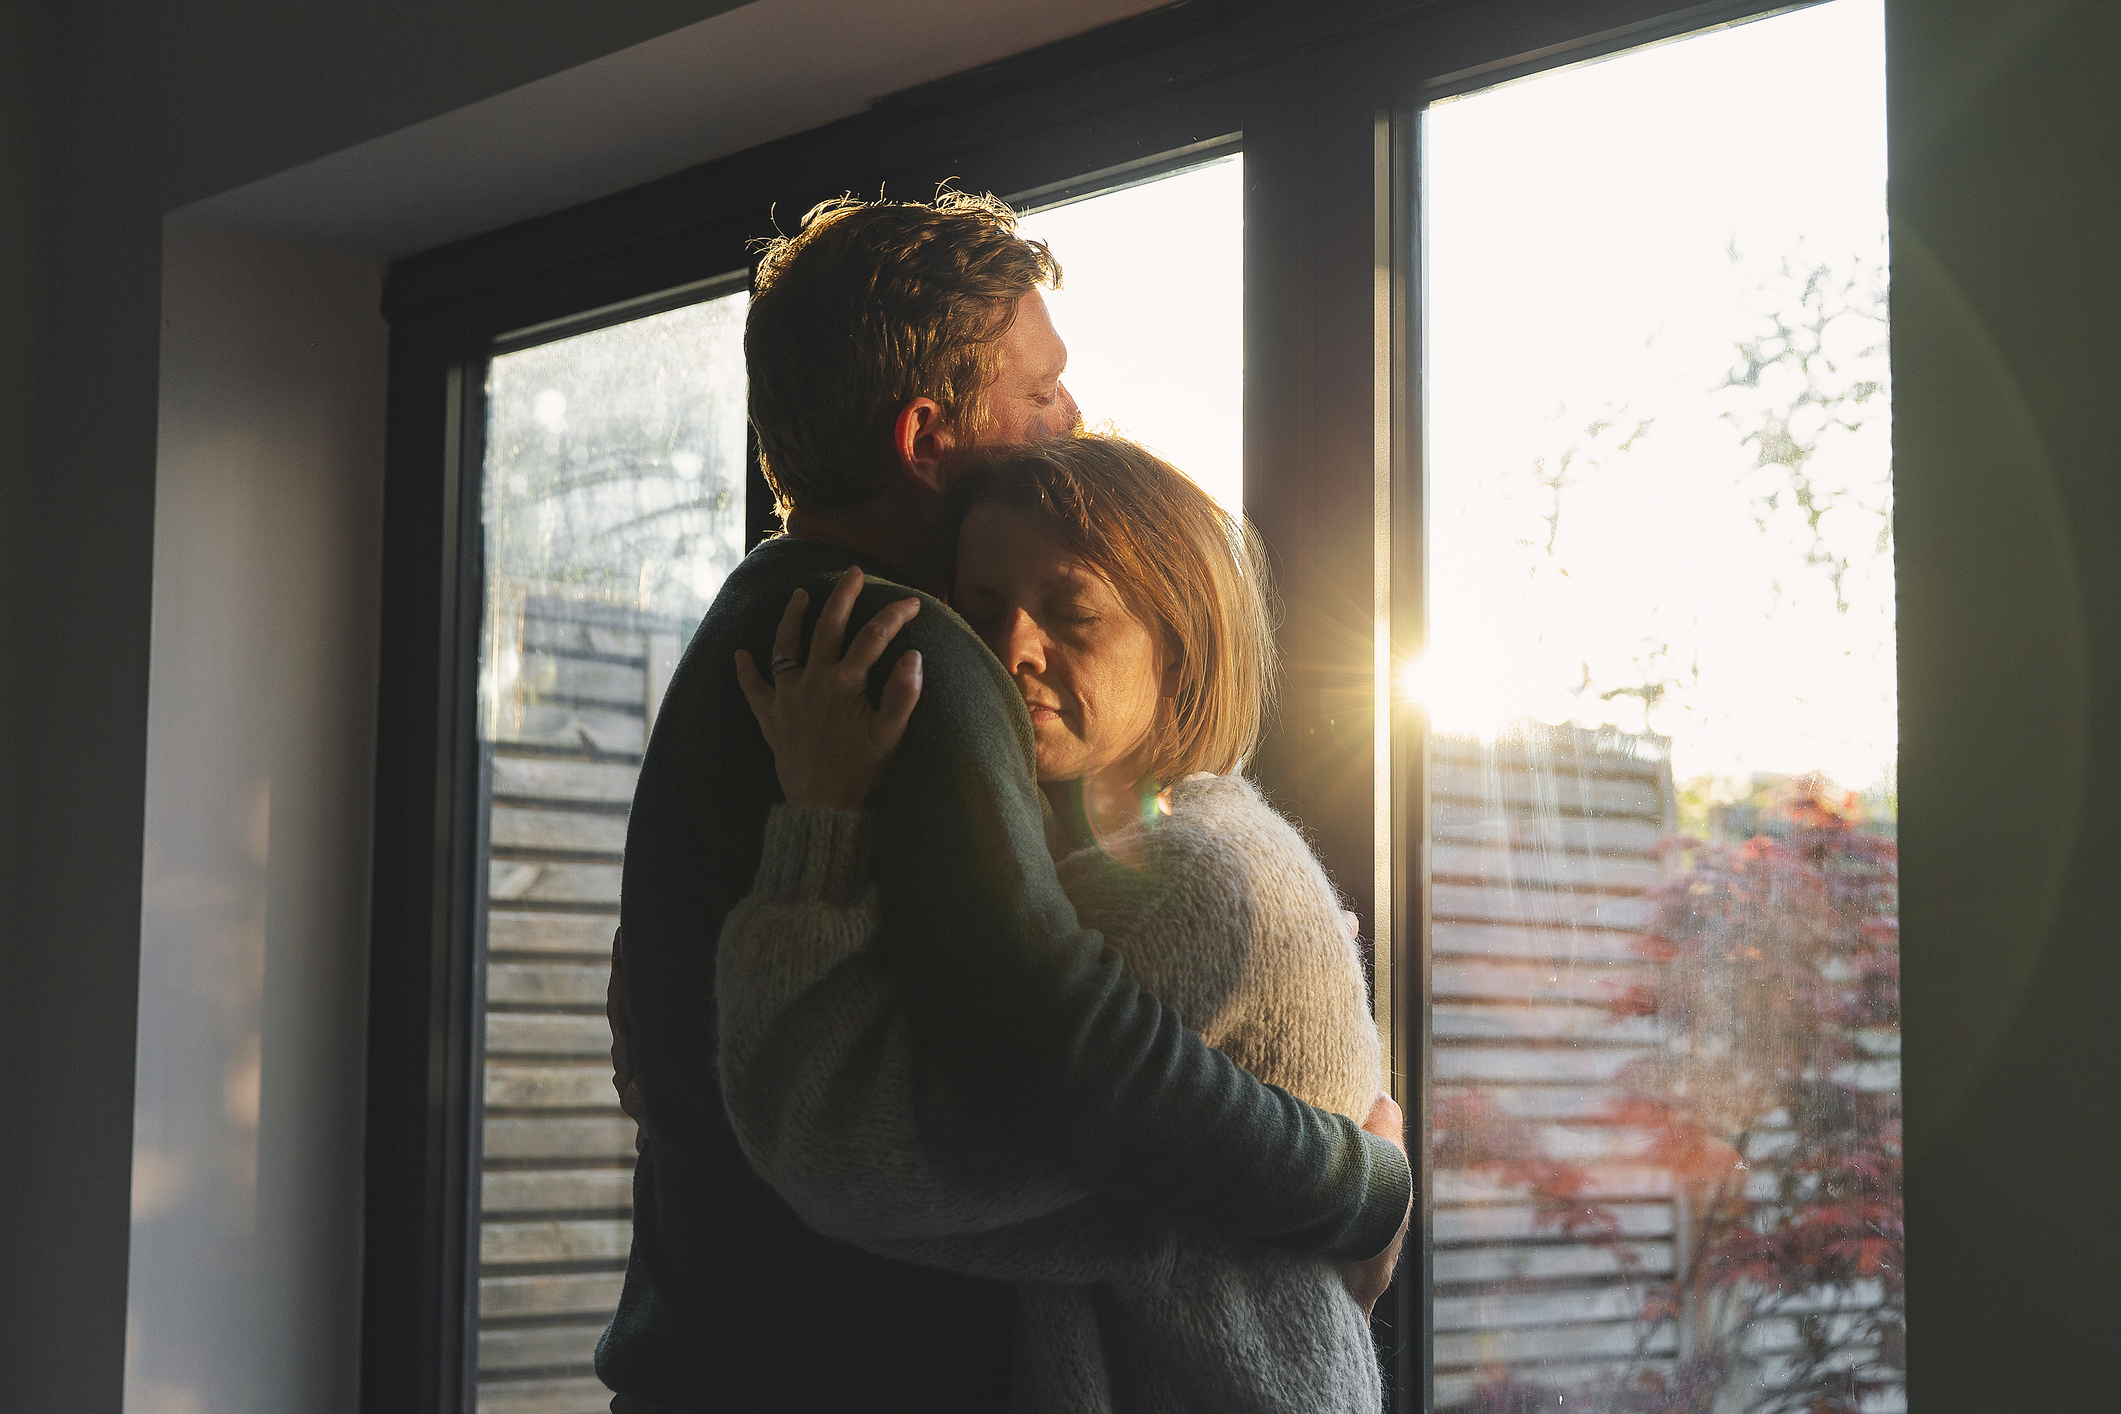 Two individuals embracing affectionately by a window with sunlight coming through